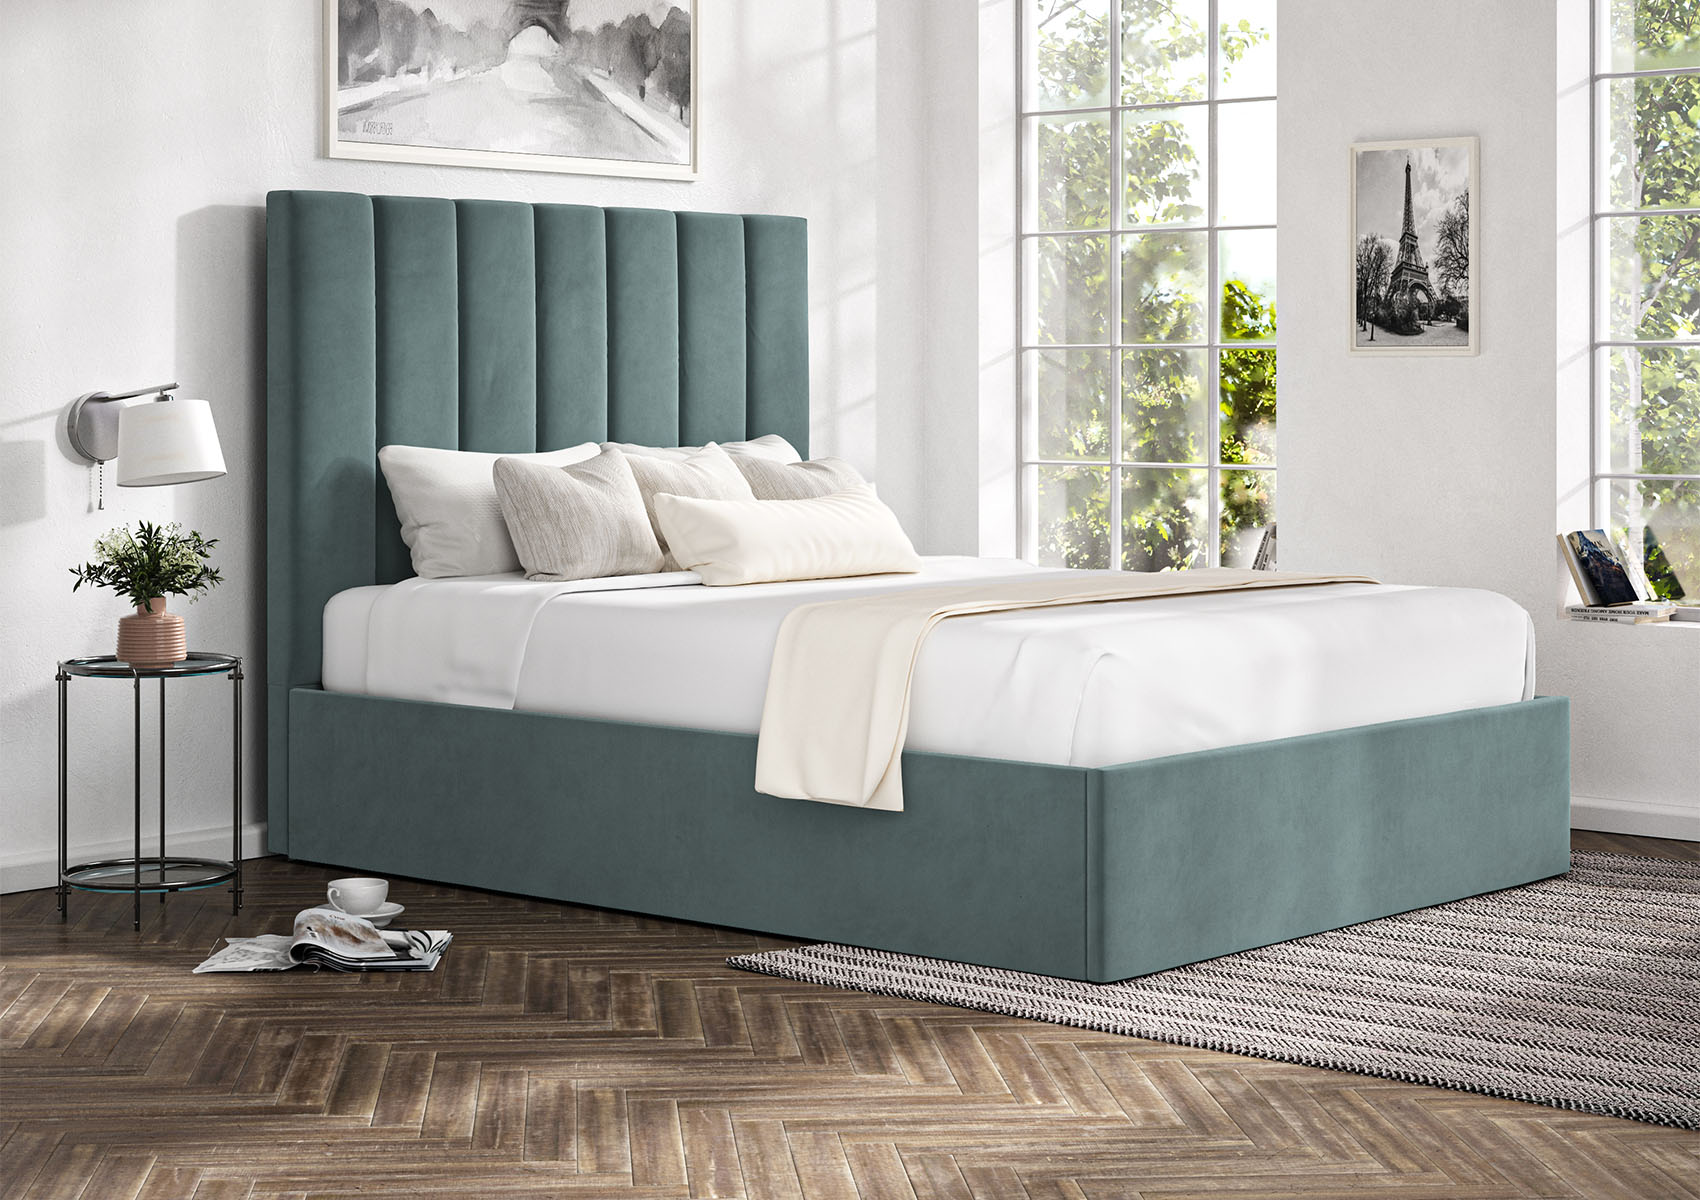 View Amalfi Eden Sea Grass Upholstered Ottoman Bed Frame Only Time4Sleep information